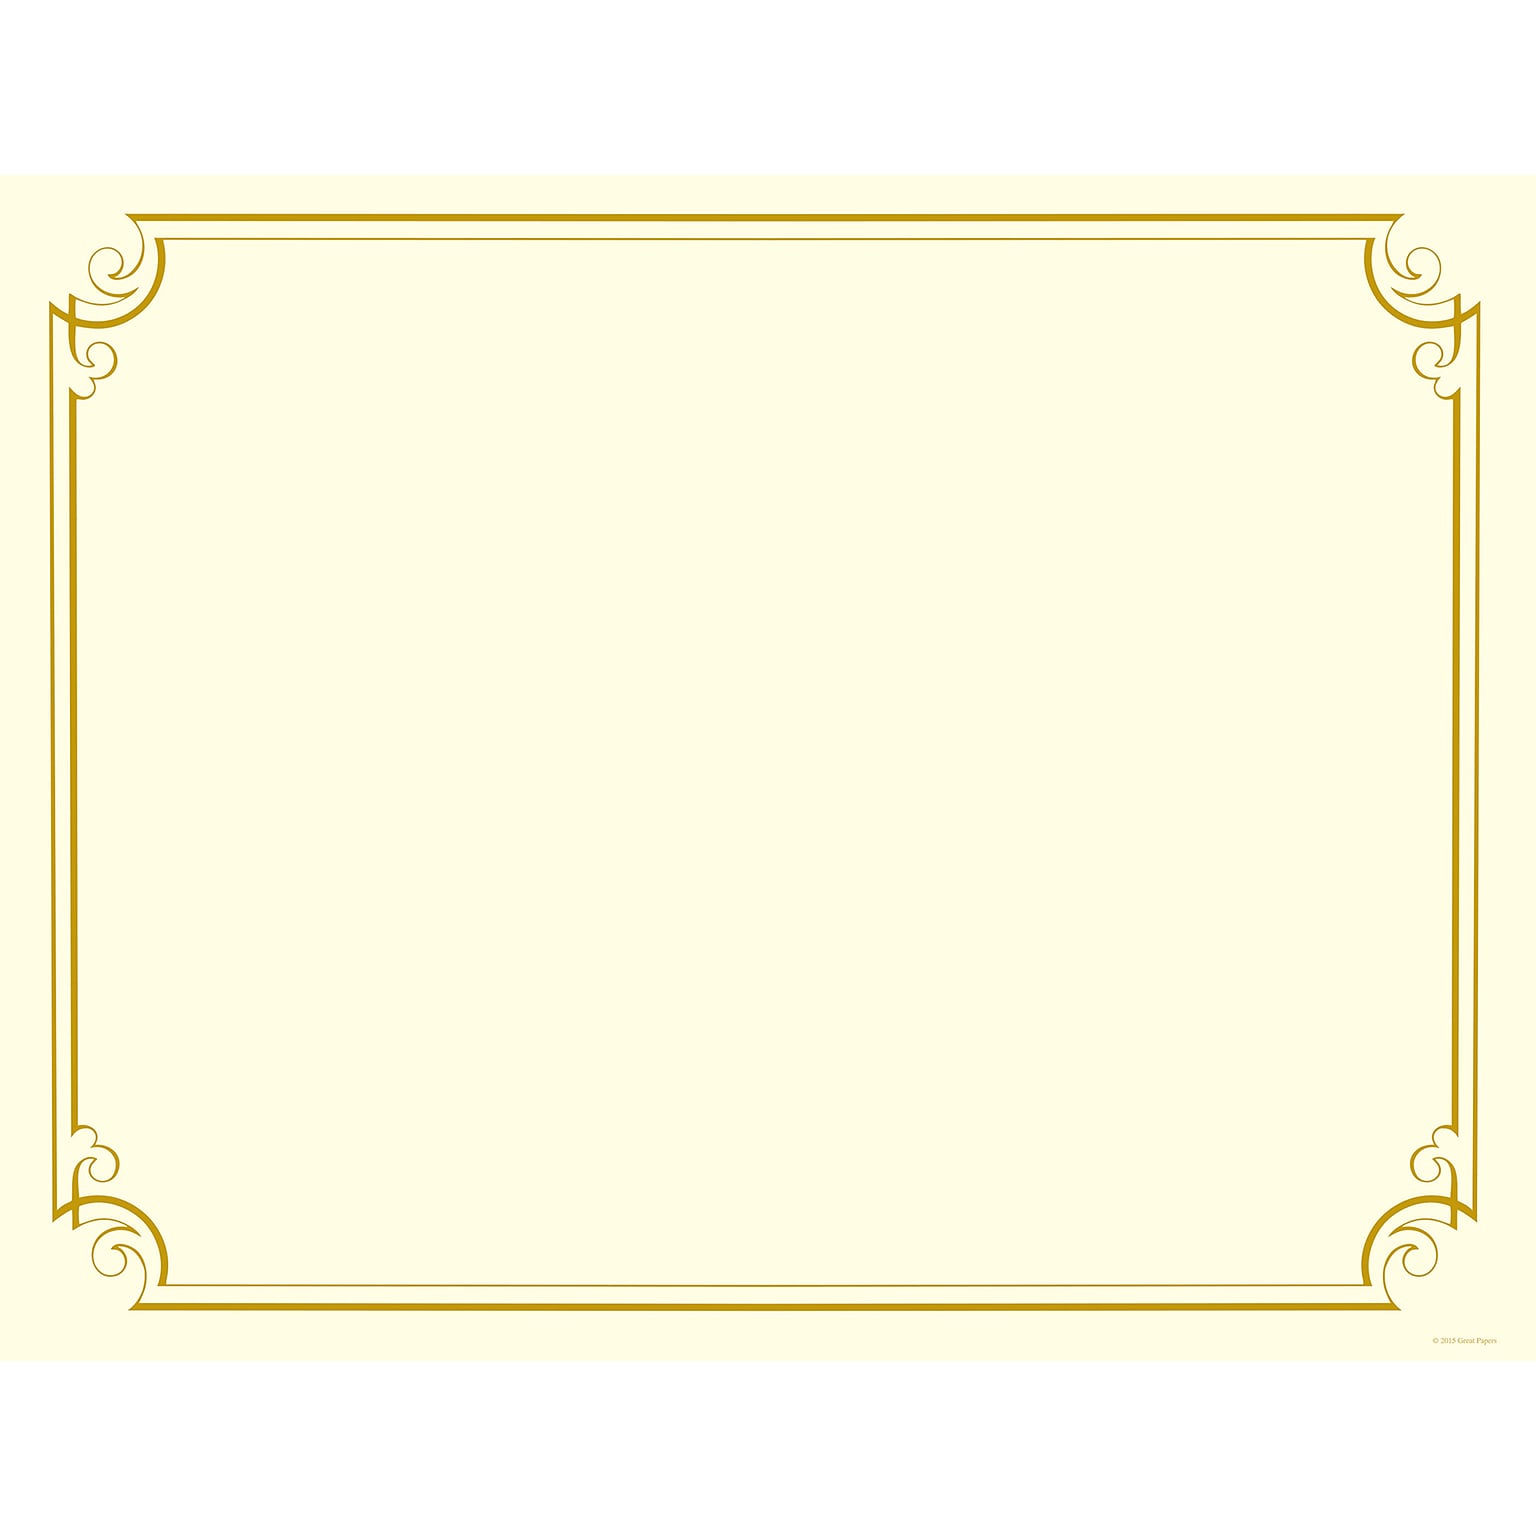 Great Papers Golden Scroll Frame Foil Certificates, 8.5 x 11, Beige/Gold, 12/Pack (2011859)